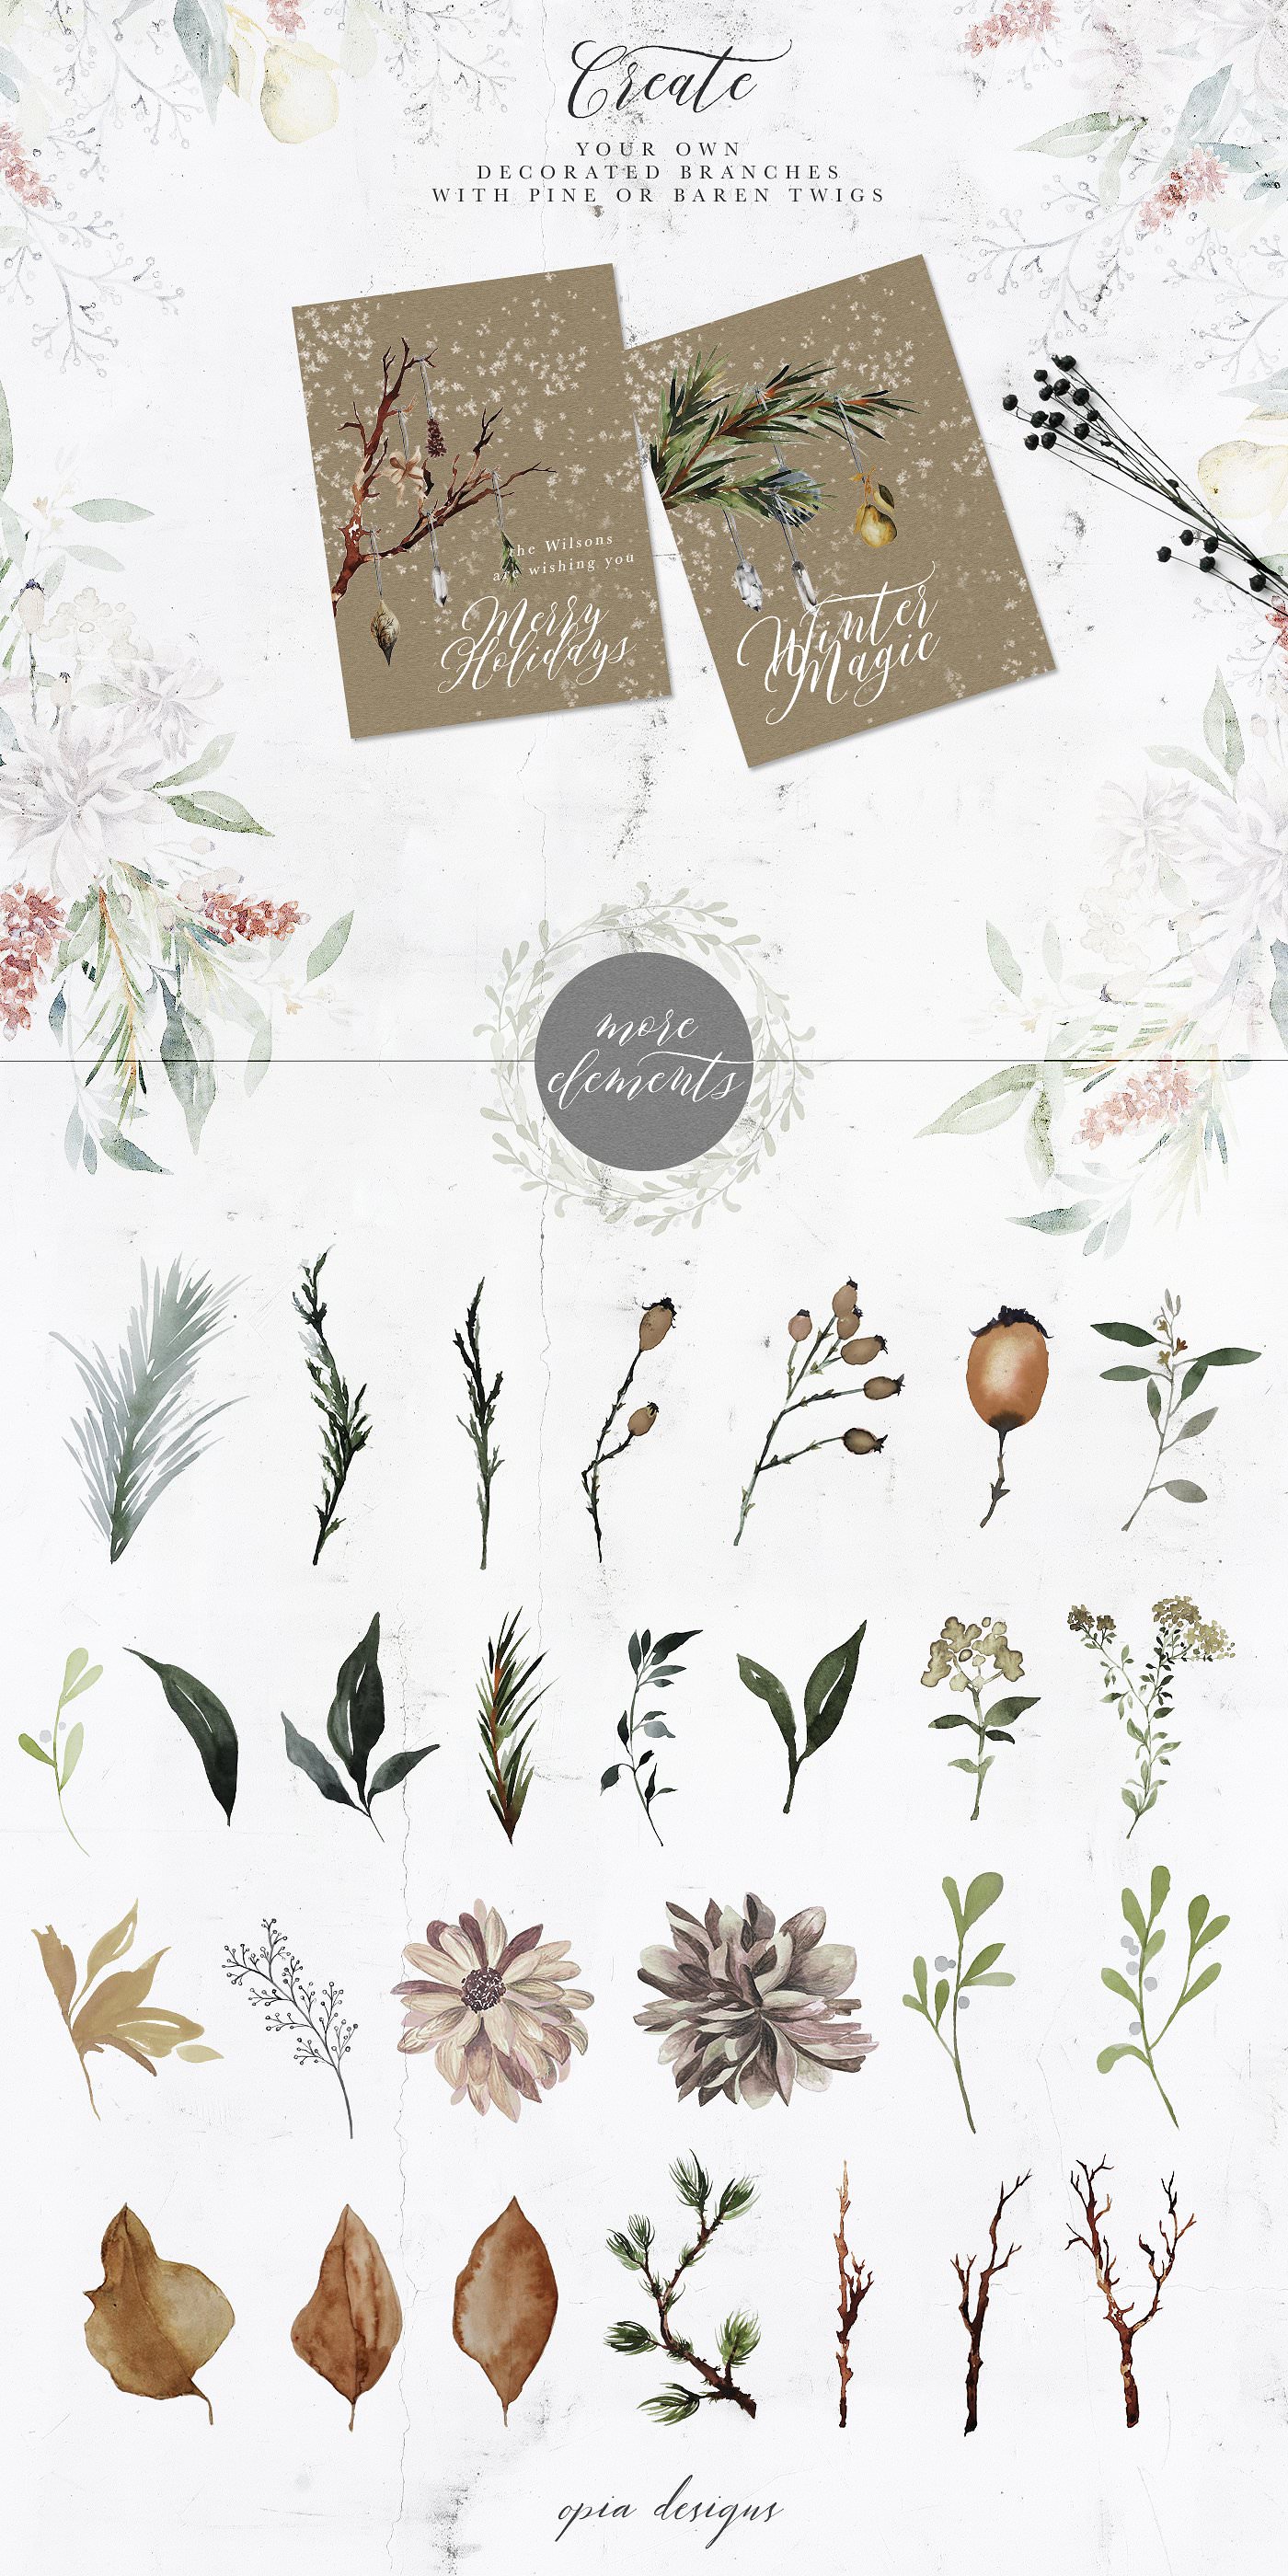 A set of decorative Christmas graphic elements - branches, leaves, florals -  included in this collection.